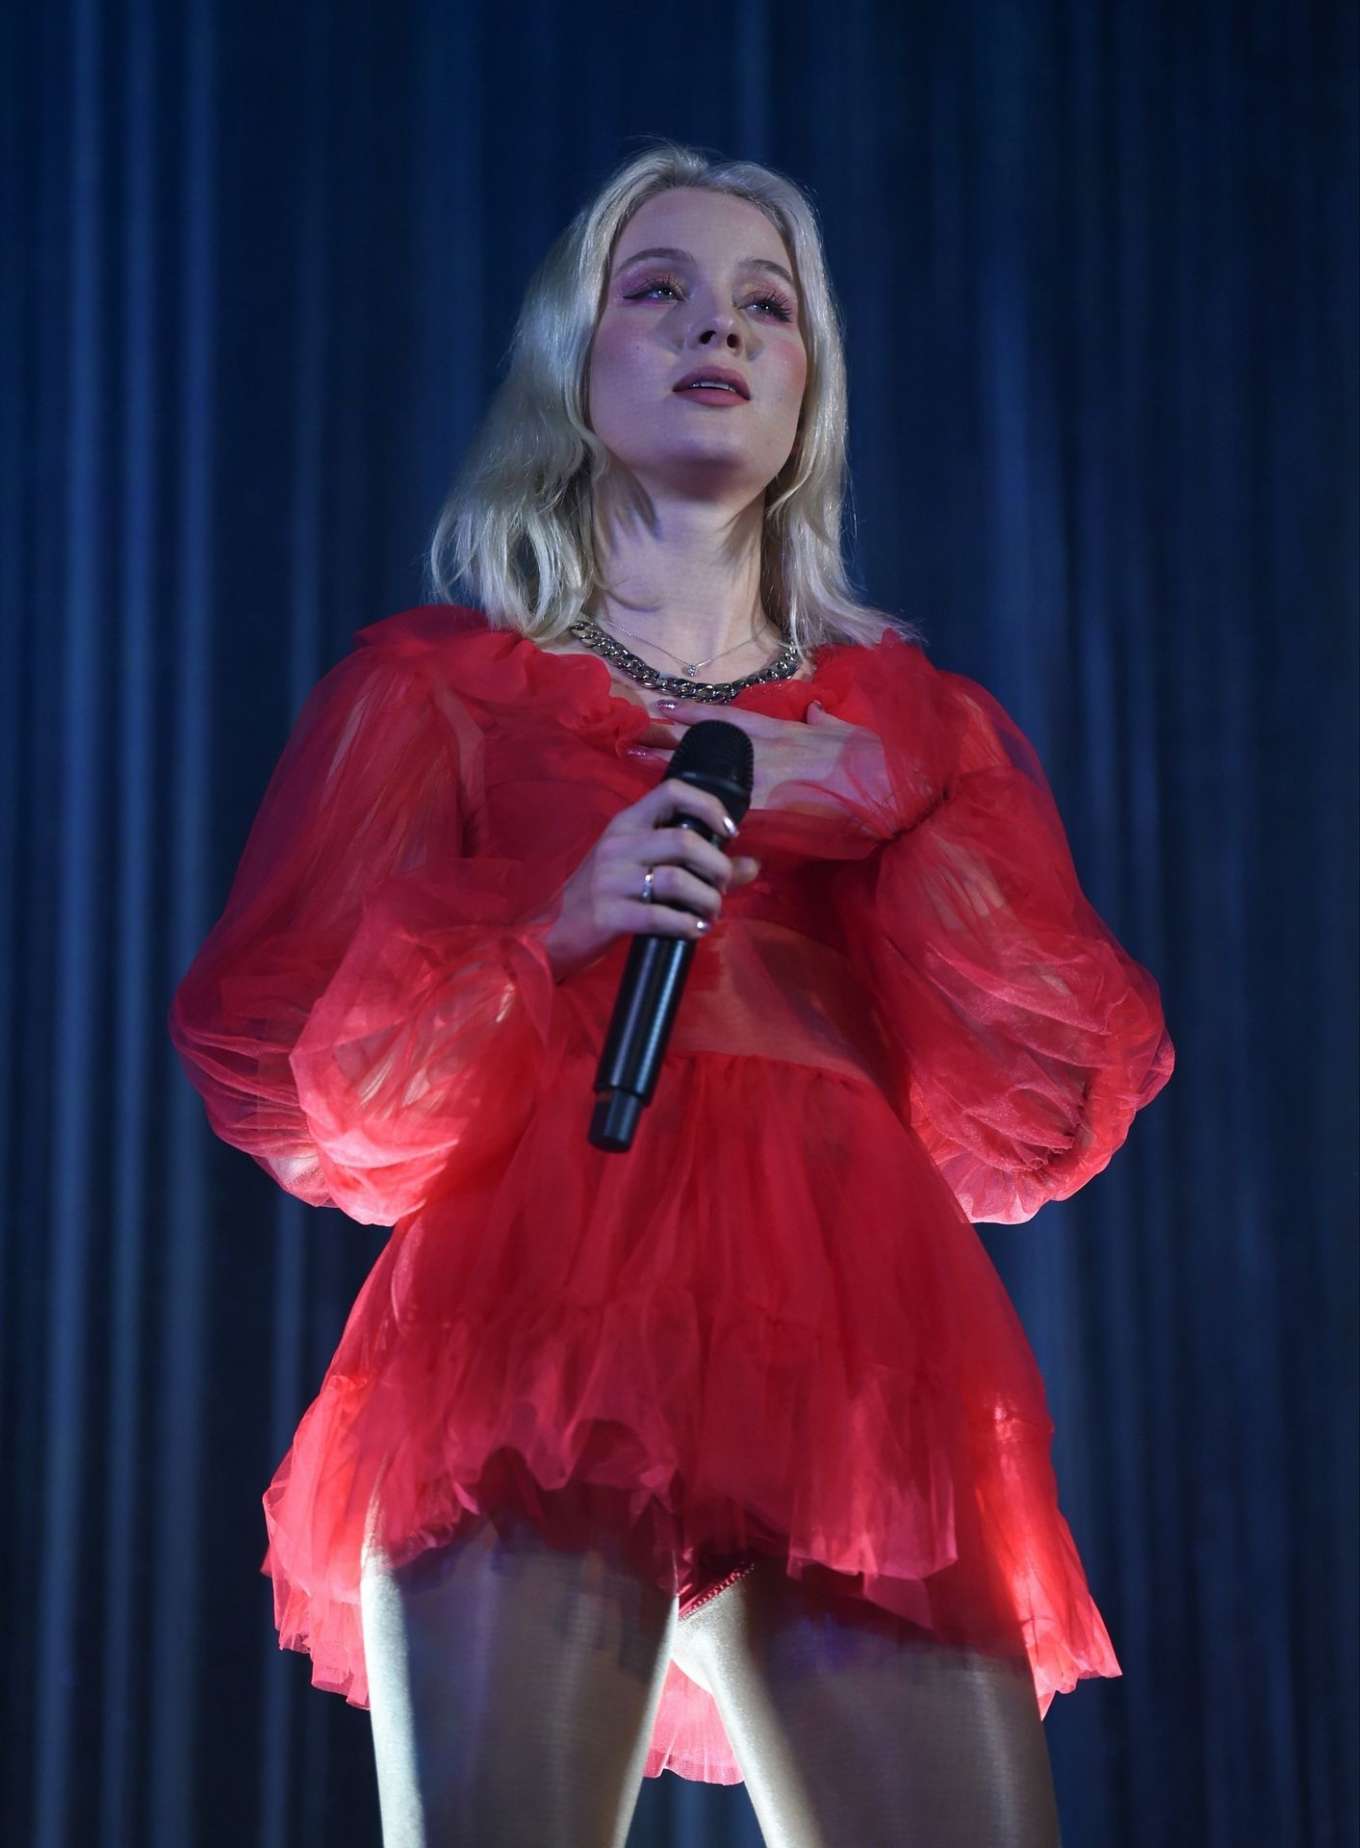 Zara Larsson â€“ Performed live at the concert at The Albert Halls in Manchester